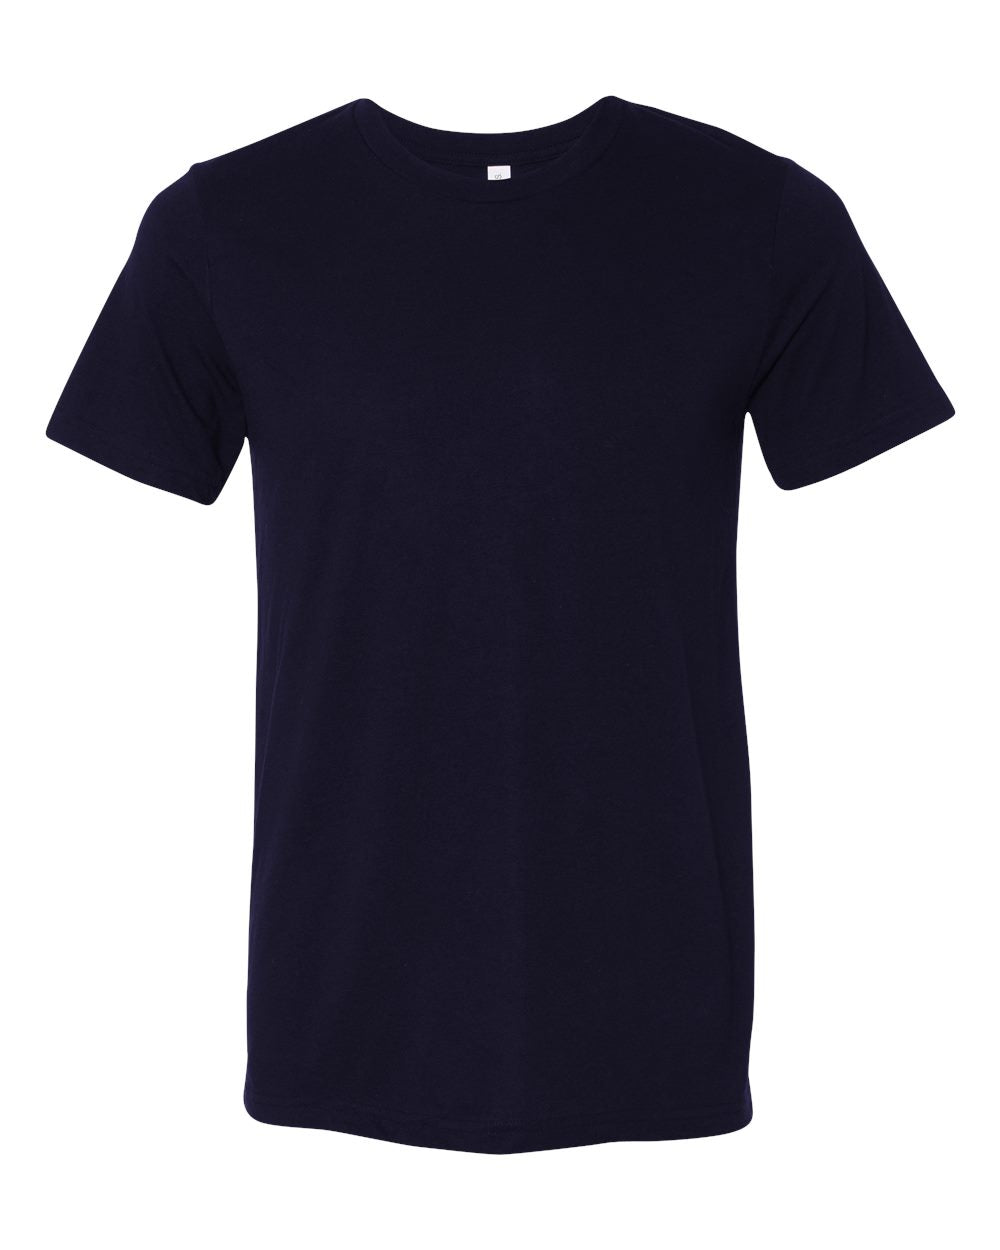 Bella + Canvas Triblend Tee (3413) in Solid Navy Triblend